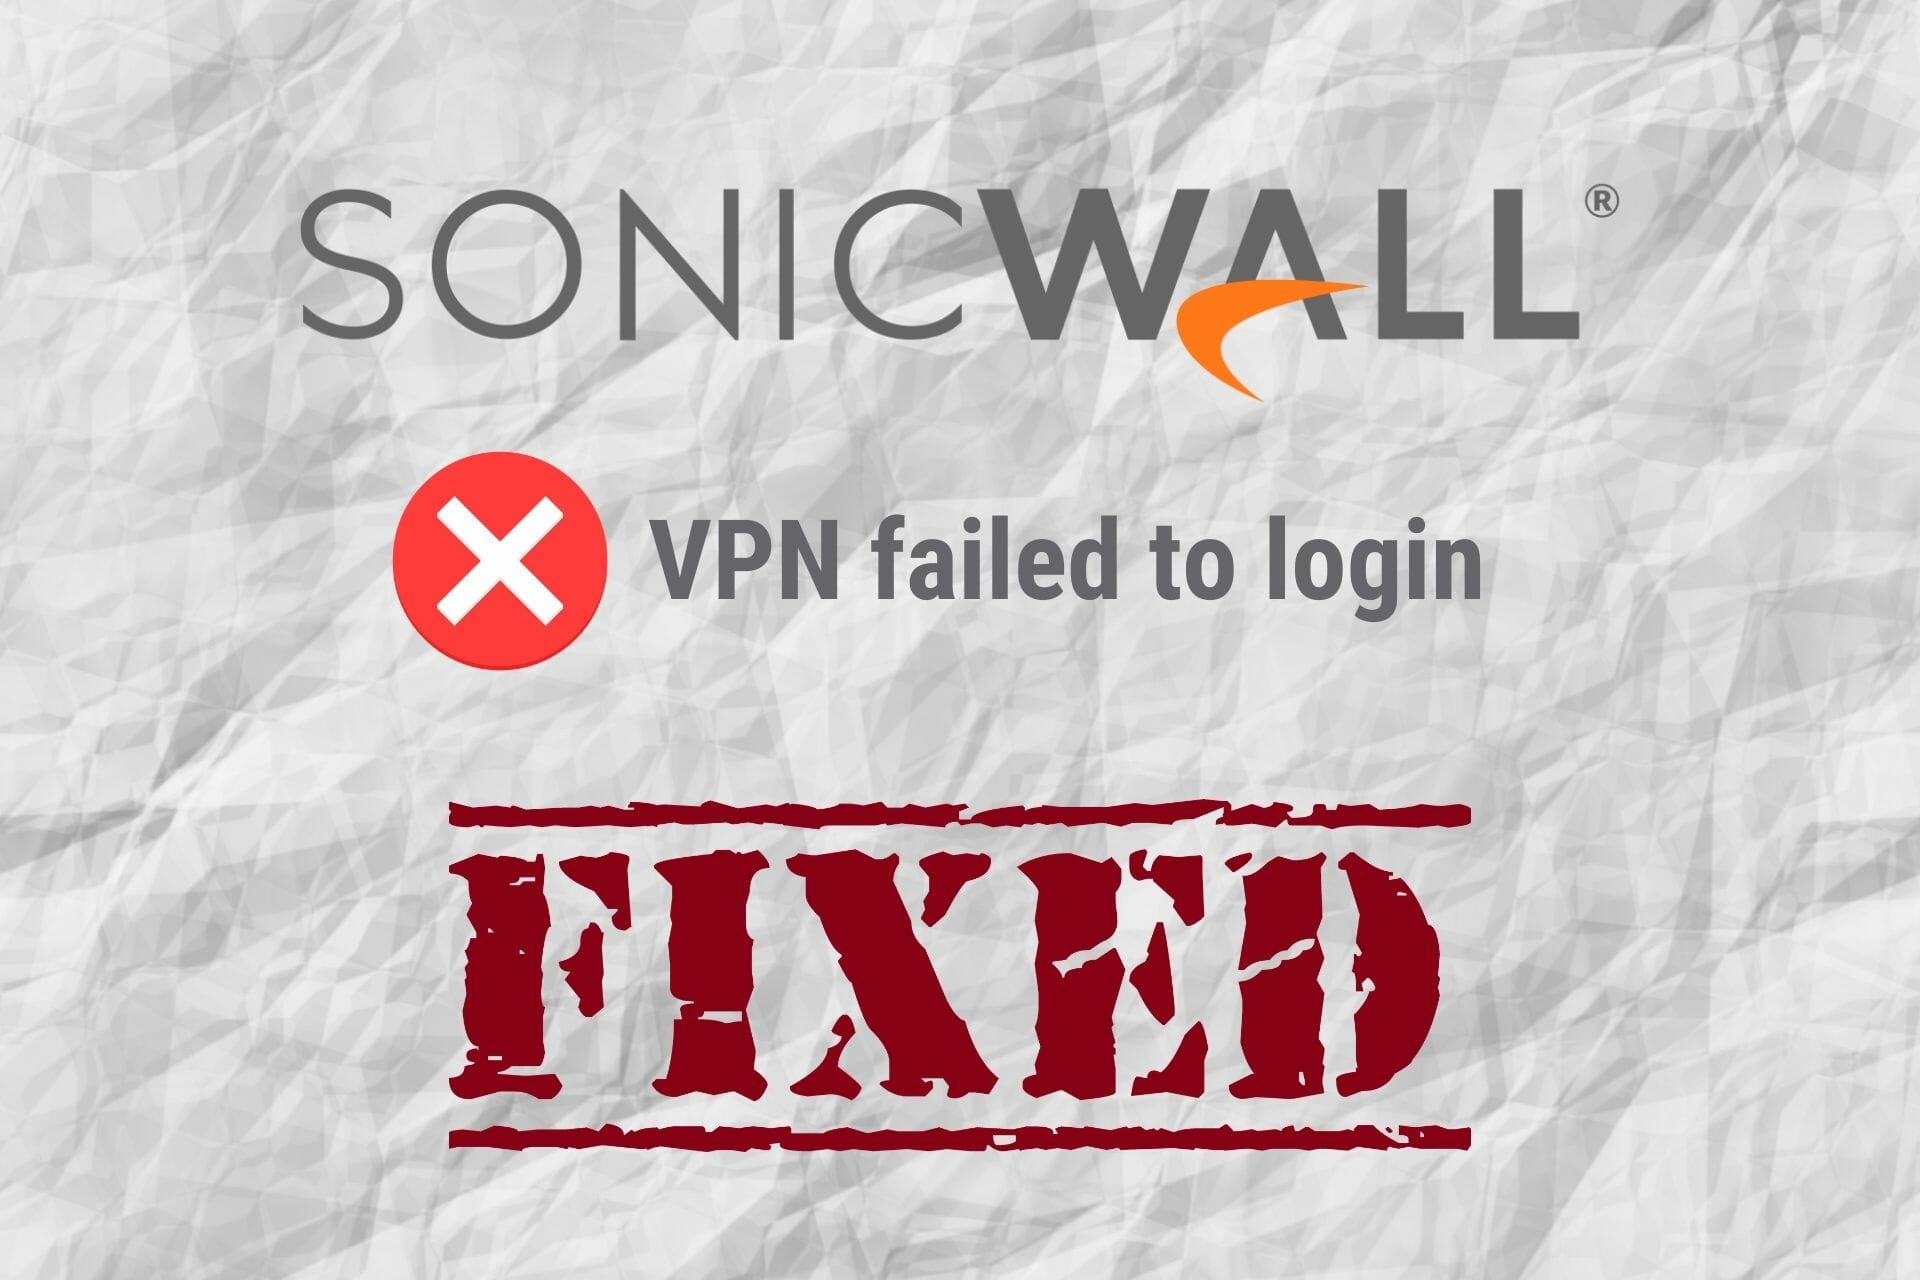 https administrator login not allowed from here sonicwall vpn